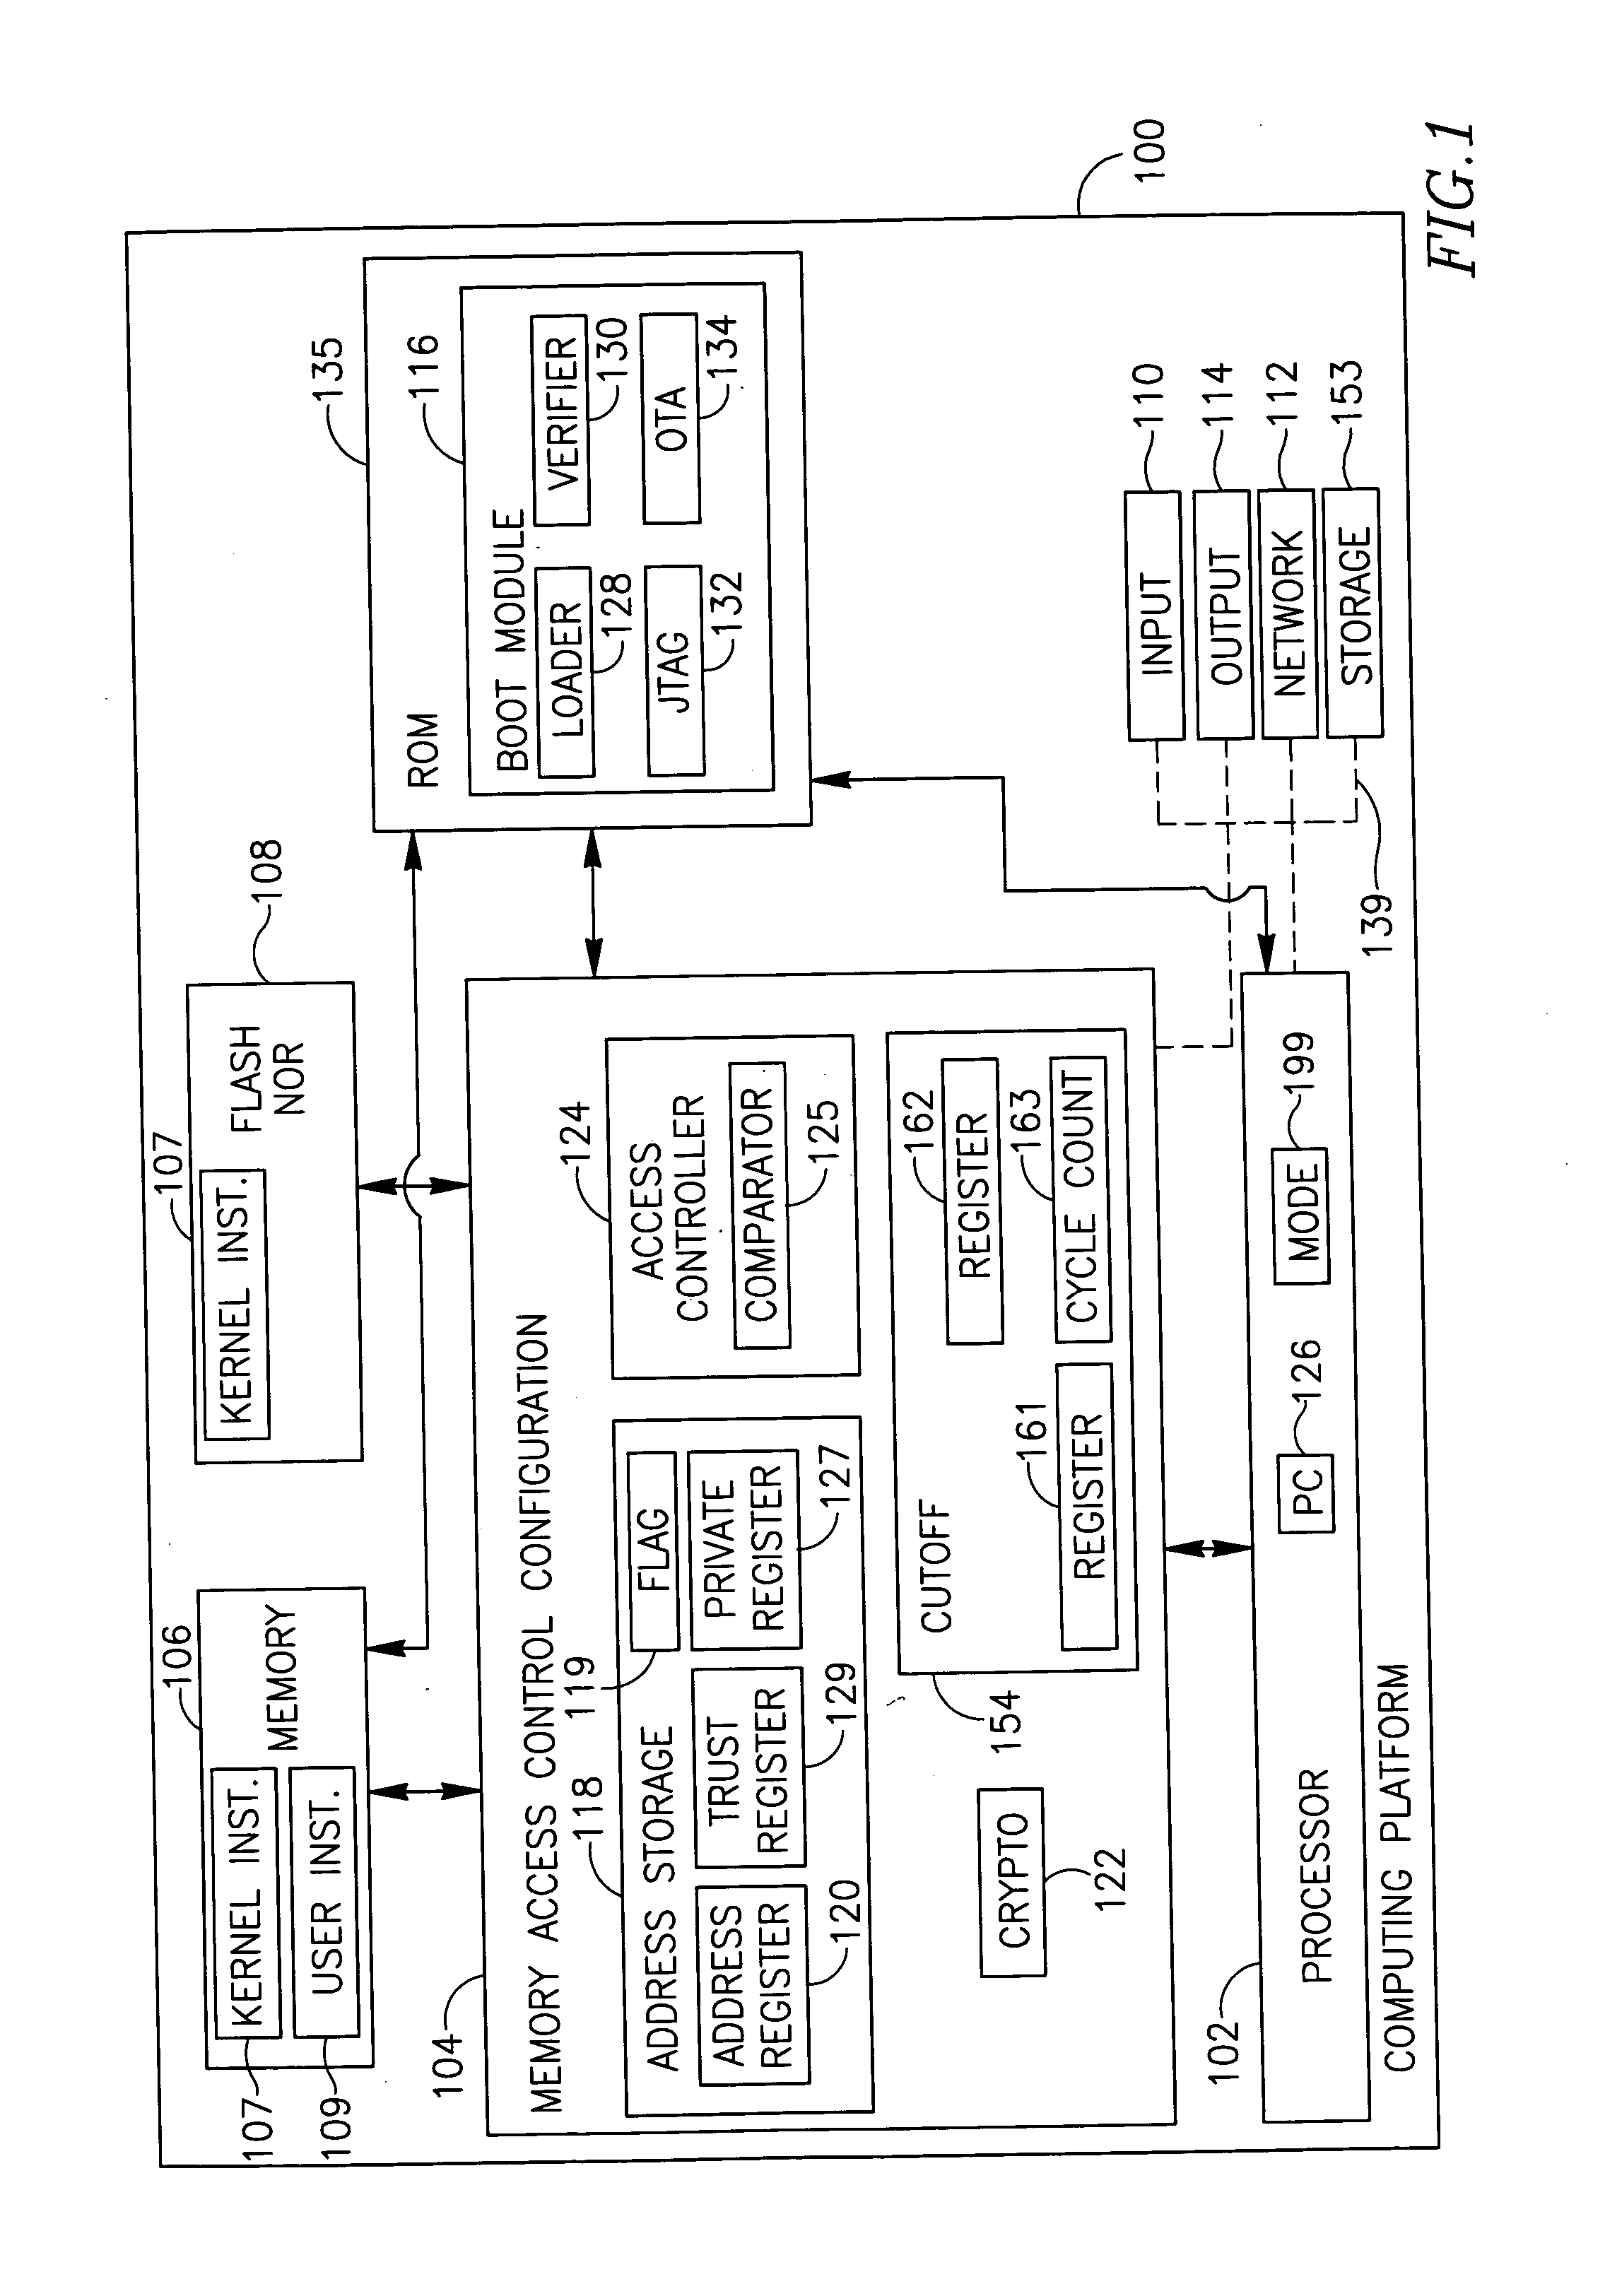 System, method and apparatus of securing an operating system